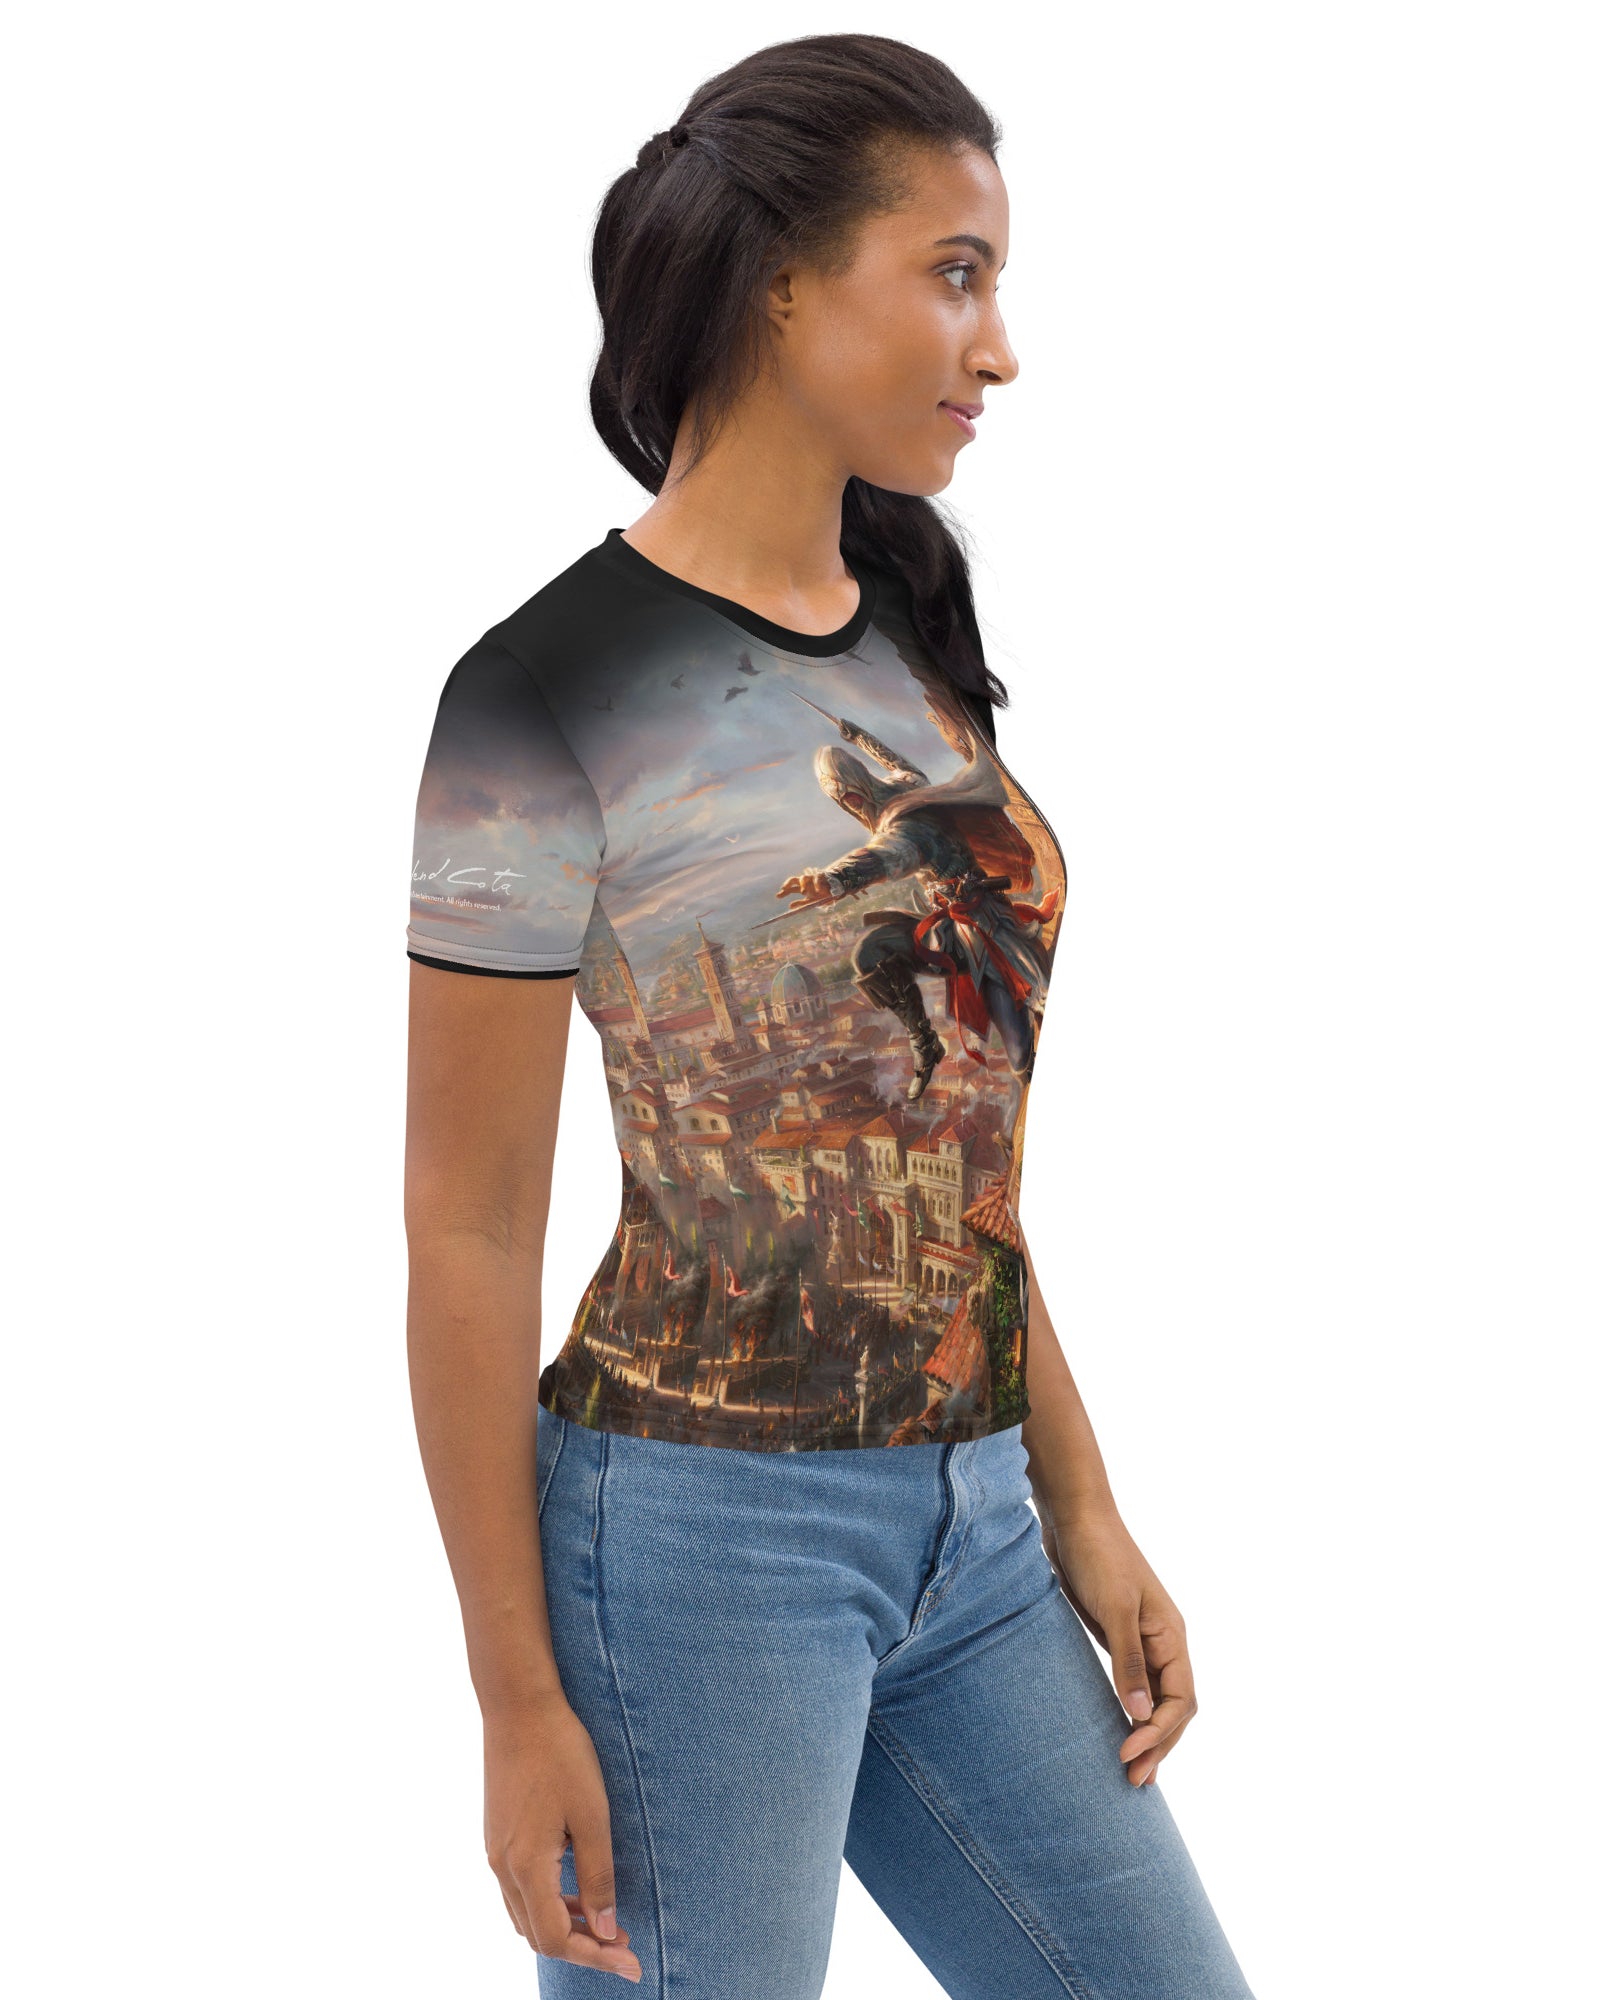 
                  
                    Assassin's Creed® II Florence Women's T-shirt
                  
                